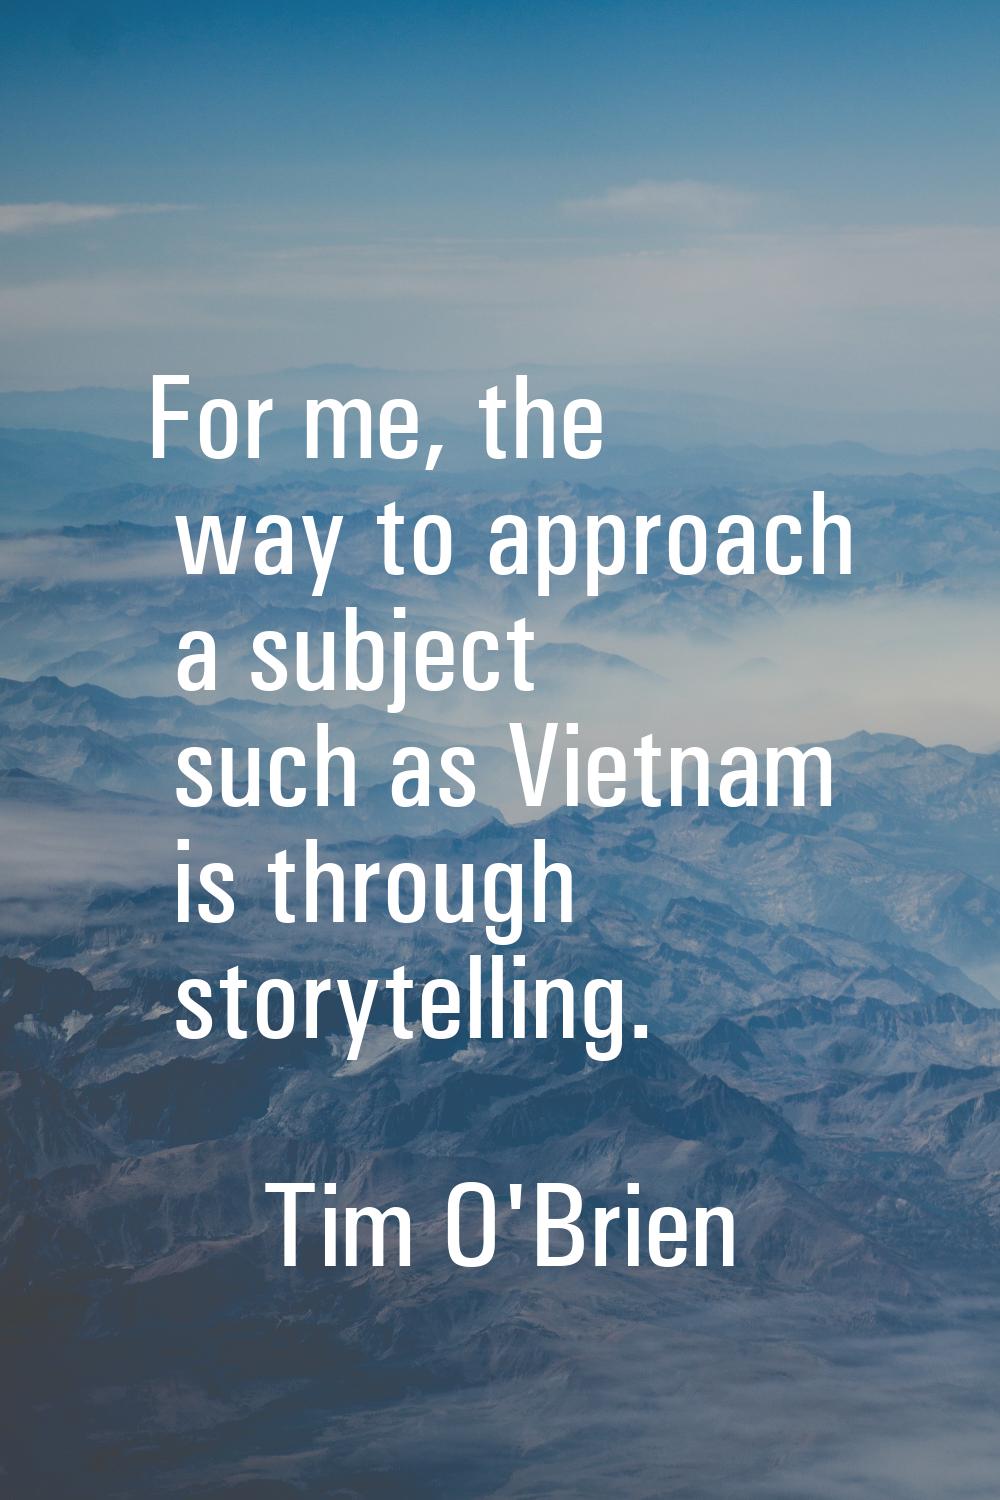 For me, the way to approach a subject such as Vietnam is through storytelling.